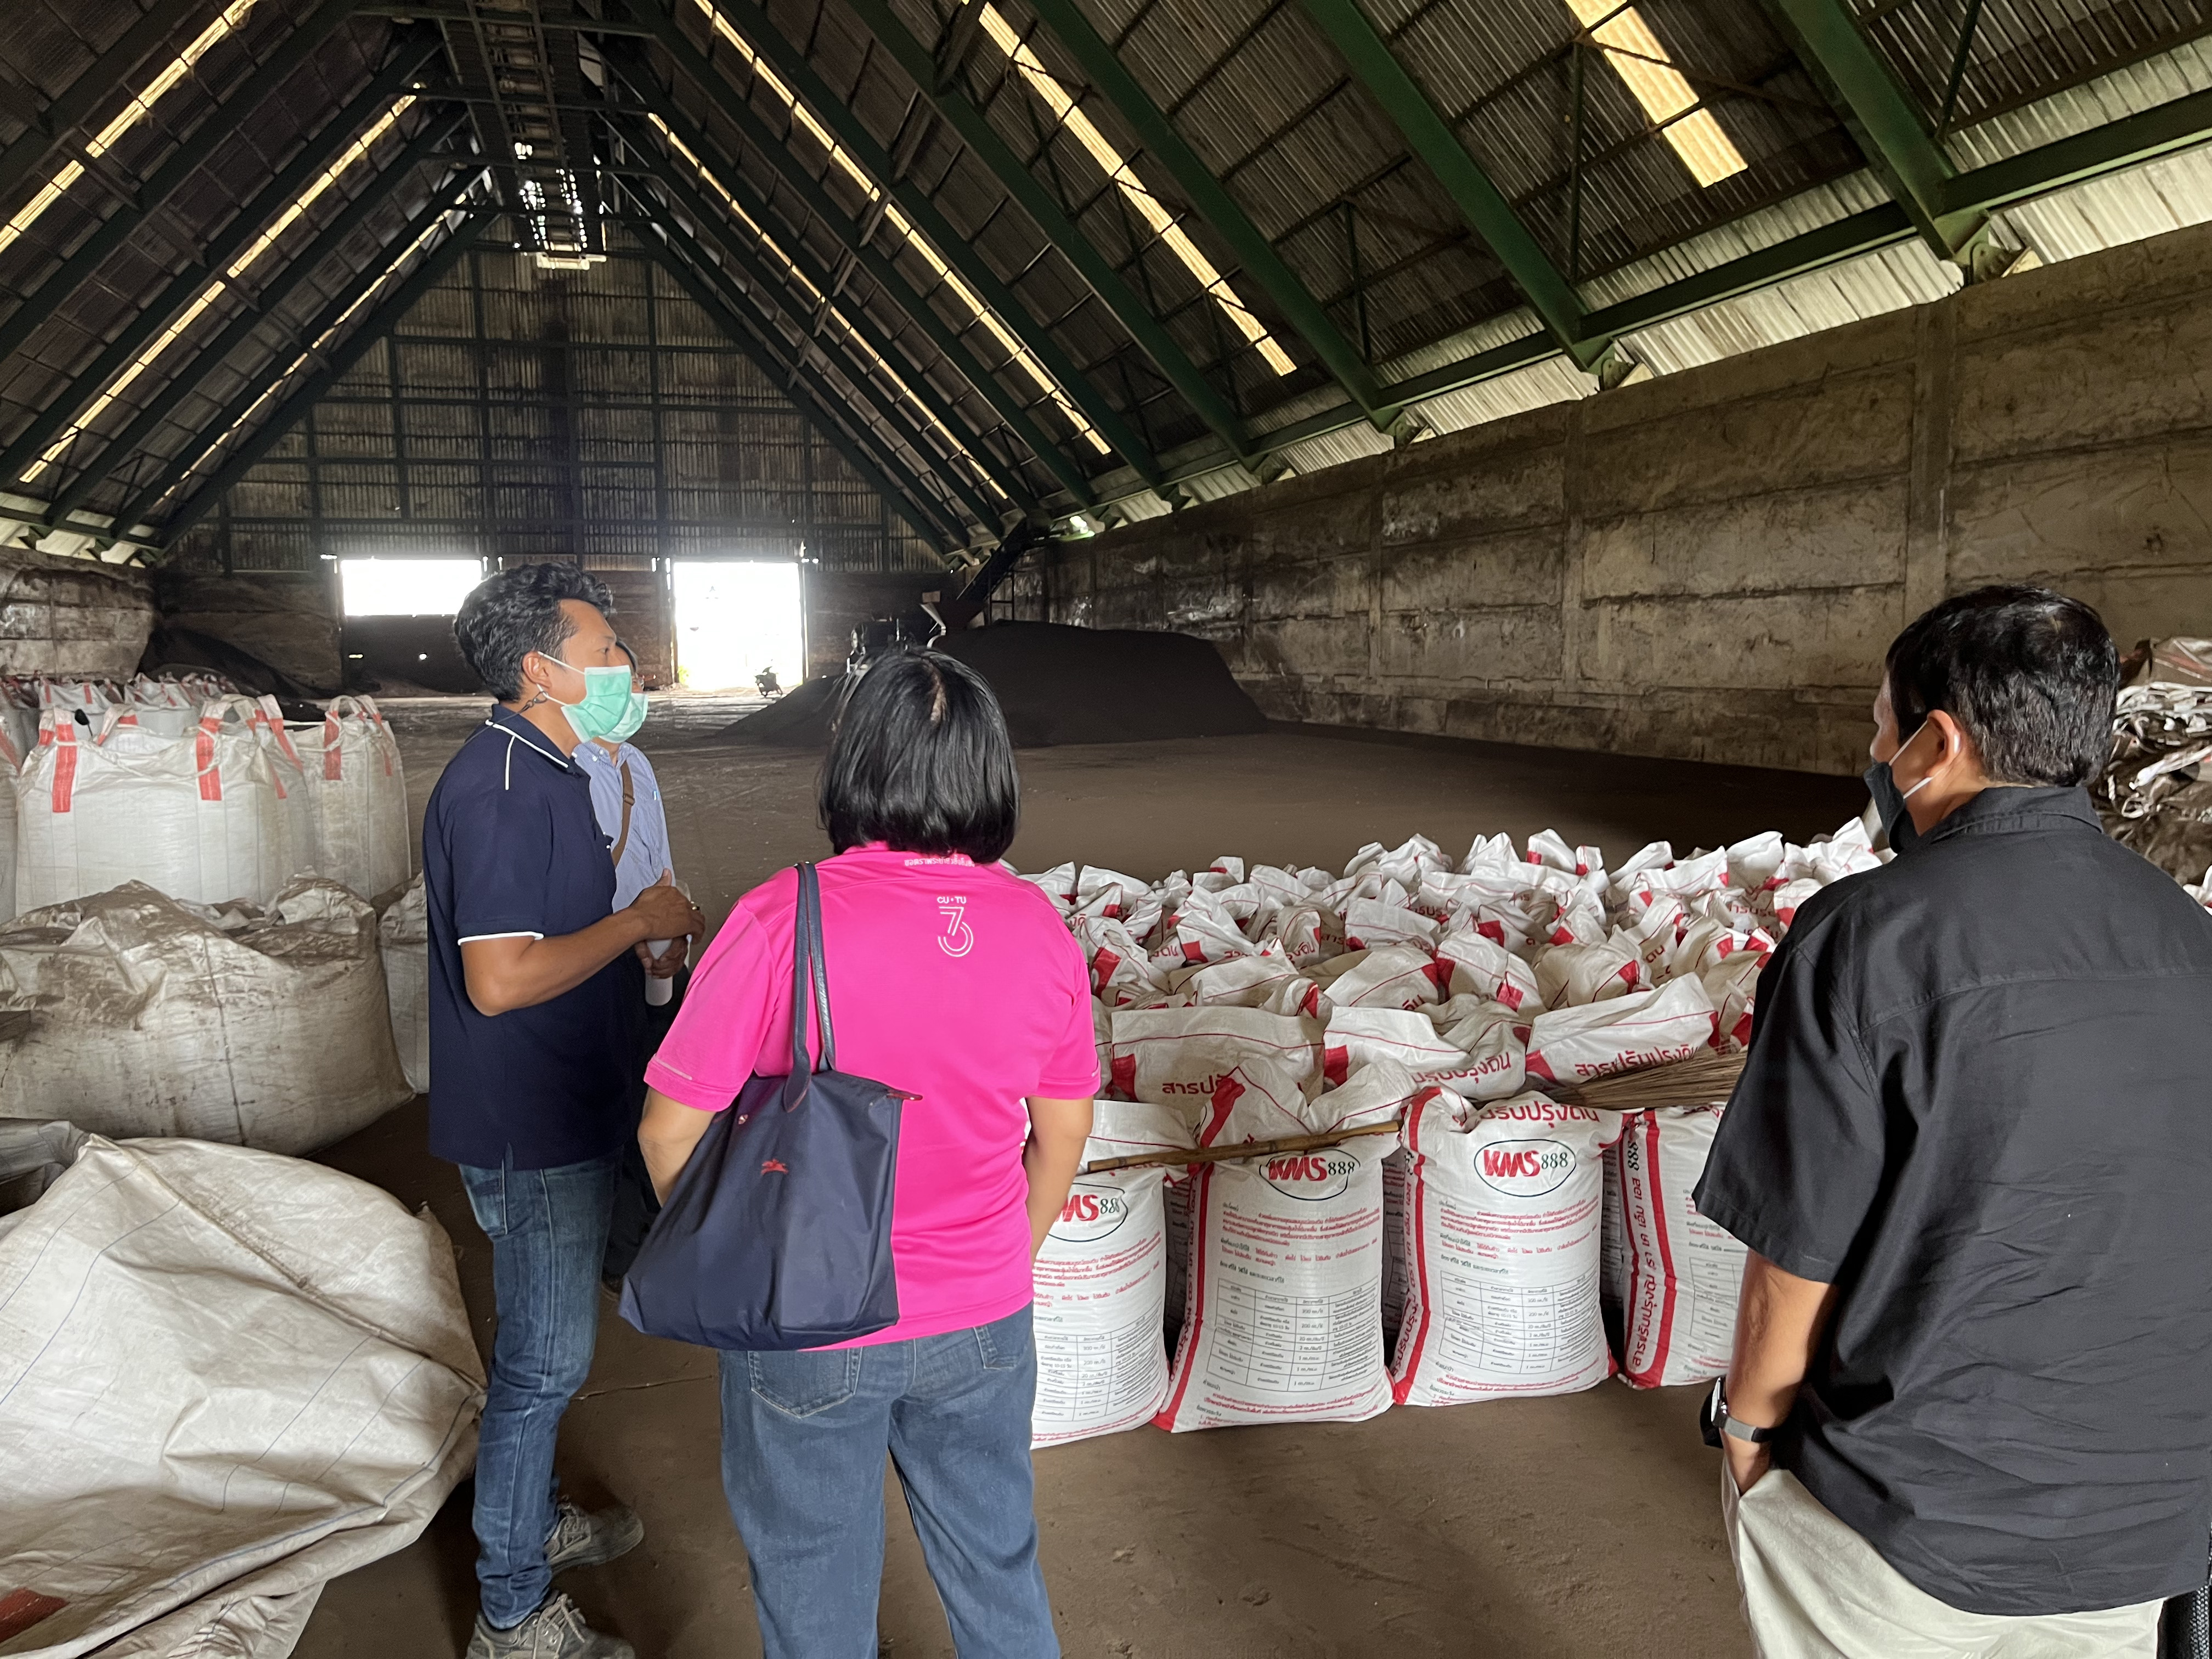 Visit to the development of organic fertilizer products.